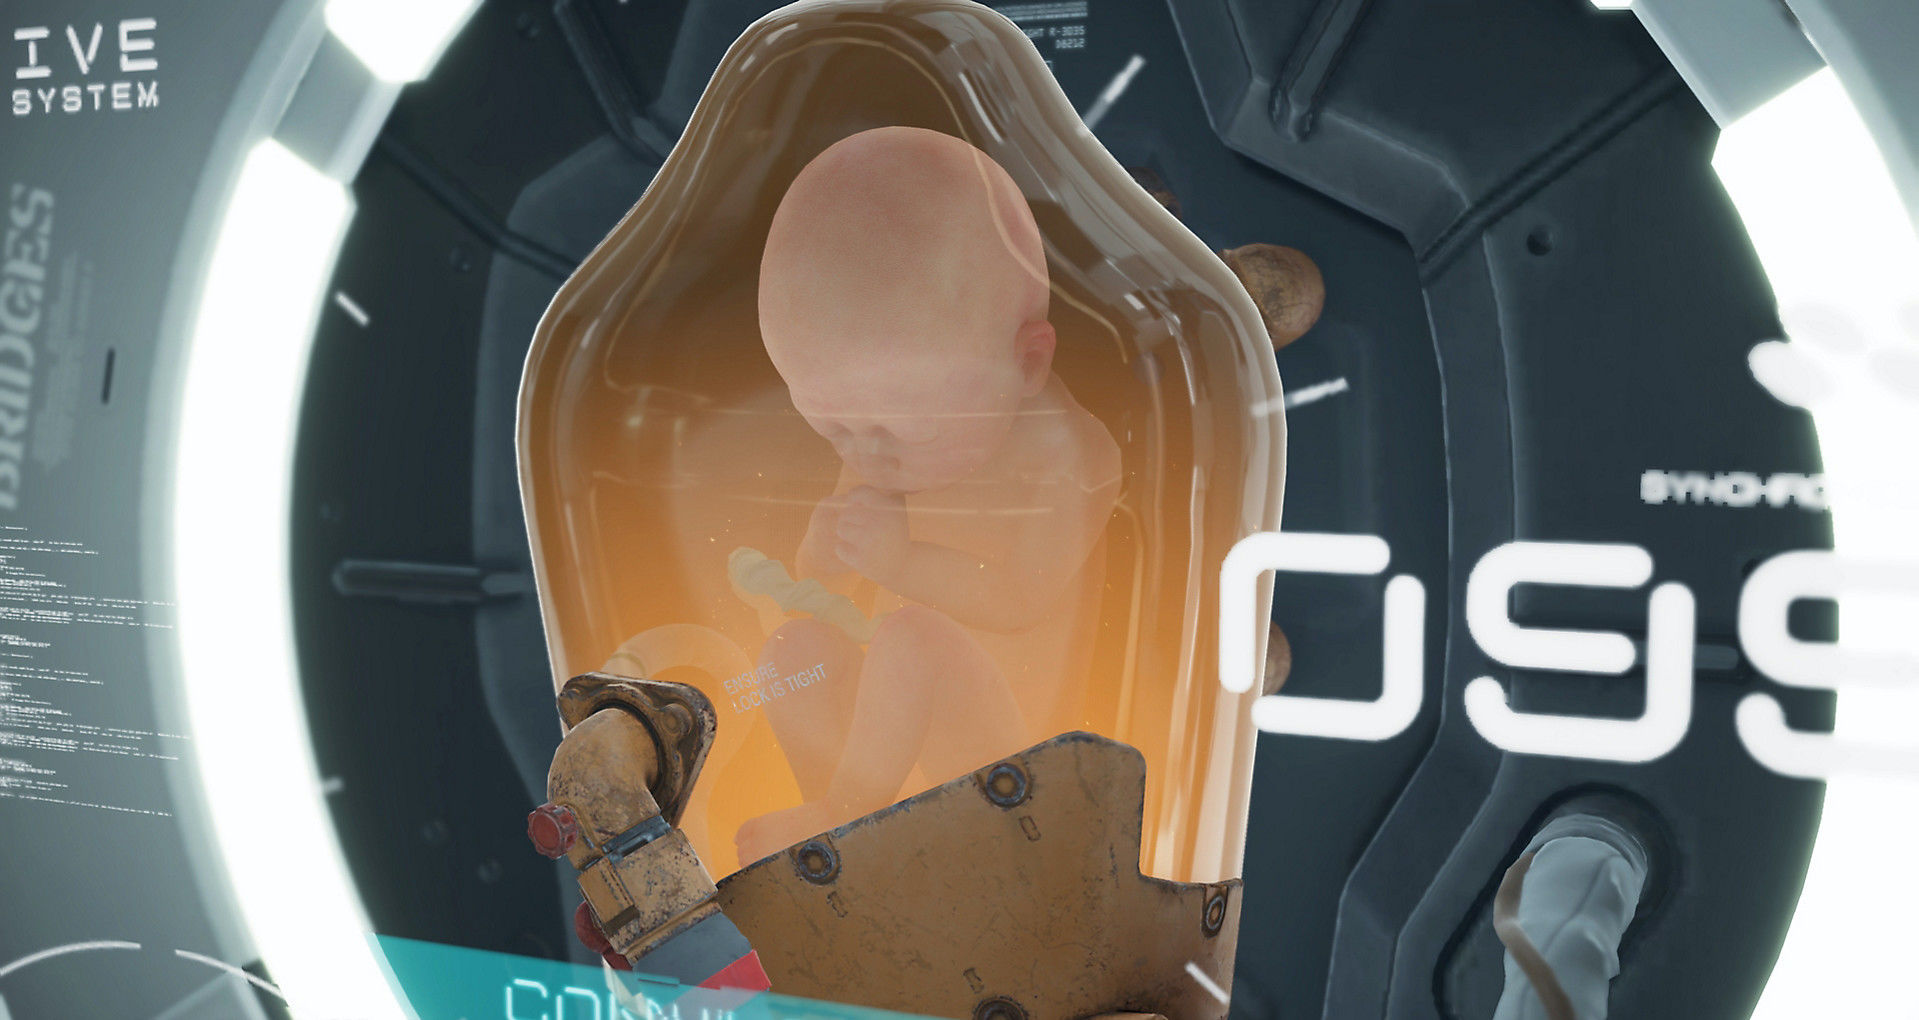 A Baby Jar from the game Death Stranding